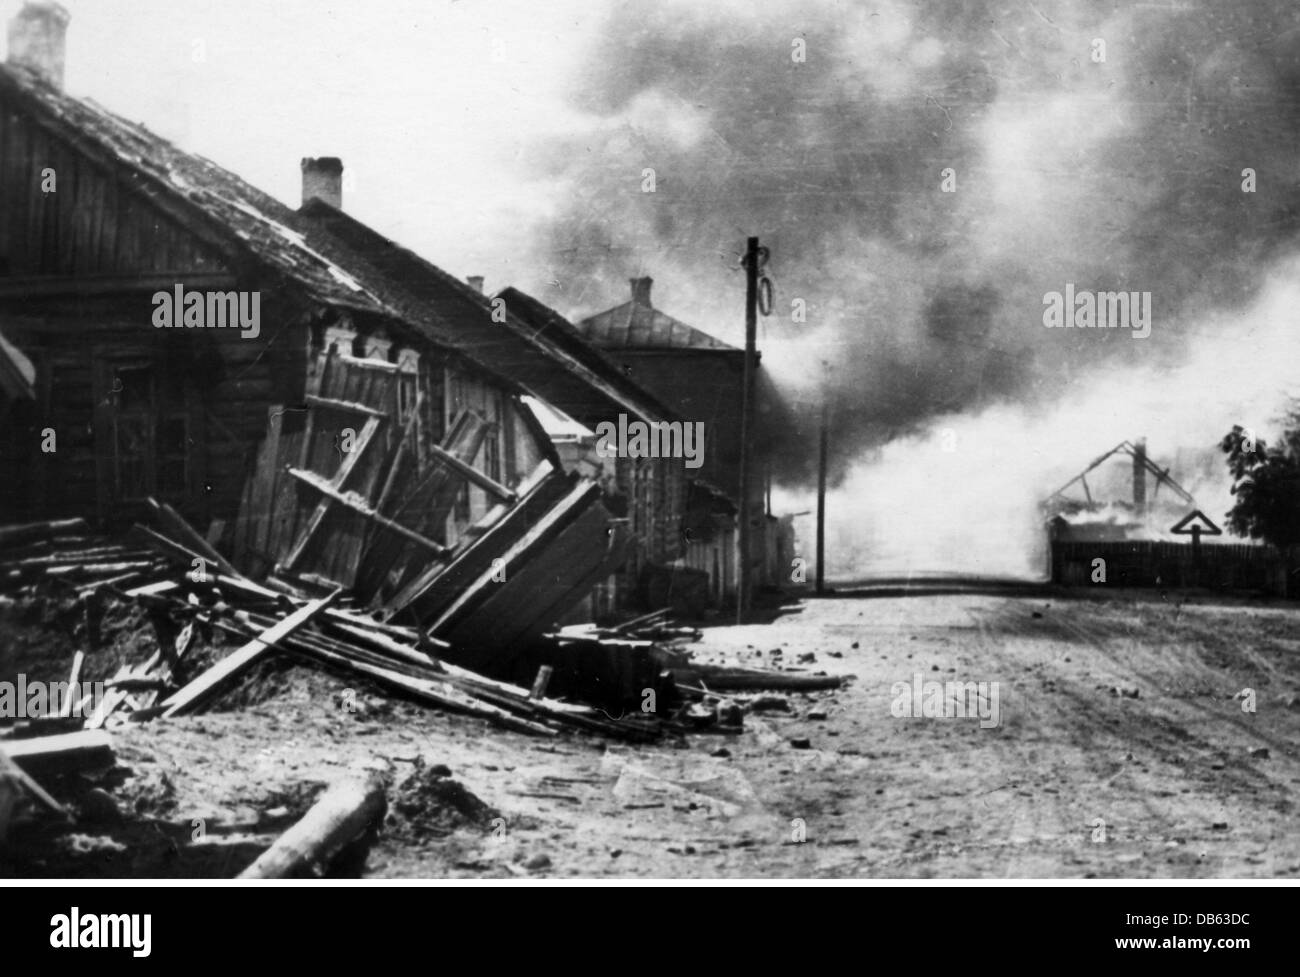 events, Second World War / WWII, Soviet Union, 'Operation Barbarossa' (German Invasion of the Soviet Union), Army Group Centre, Belarus, the town of Dzisna on the Daugava River in flames, 3.7.1941, Additional-Rights-Clearences-Not Available Stock Photo